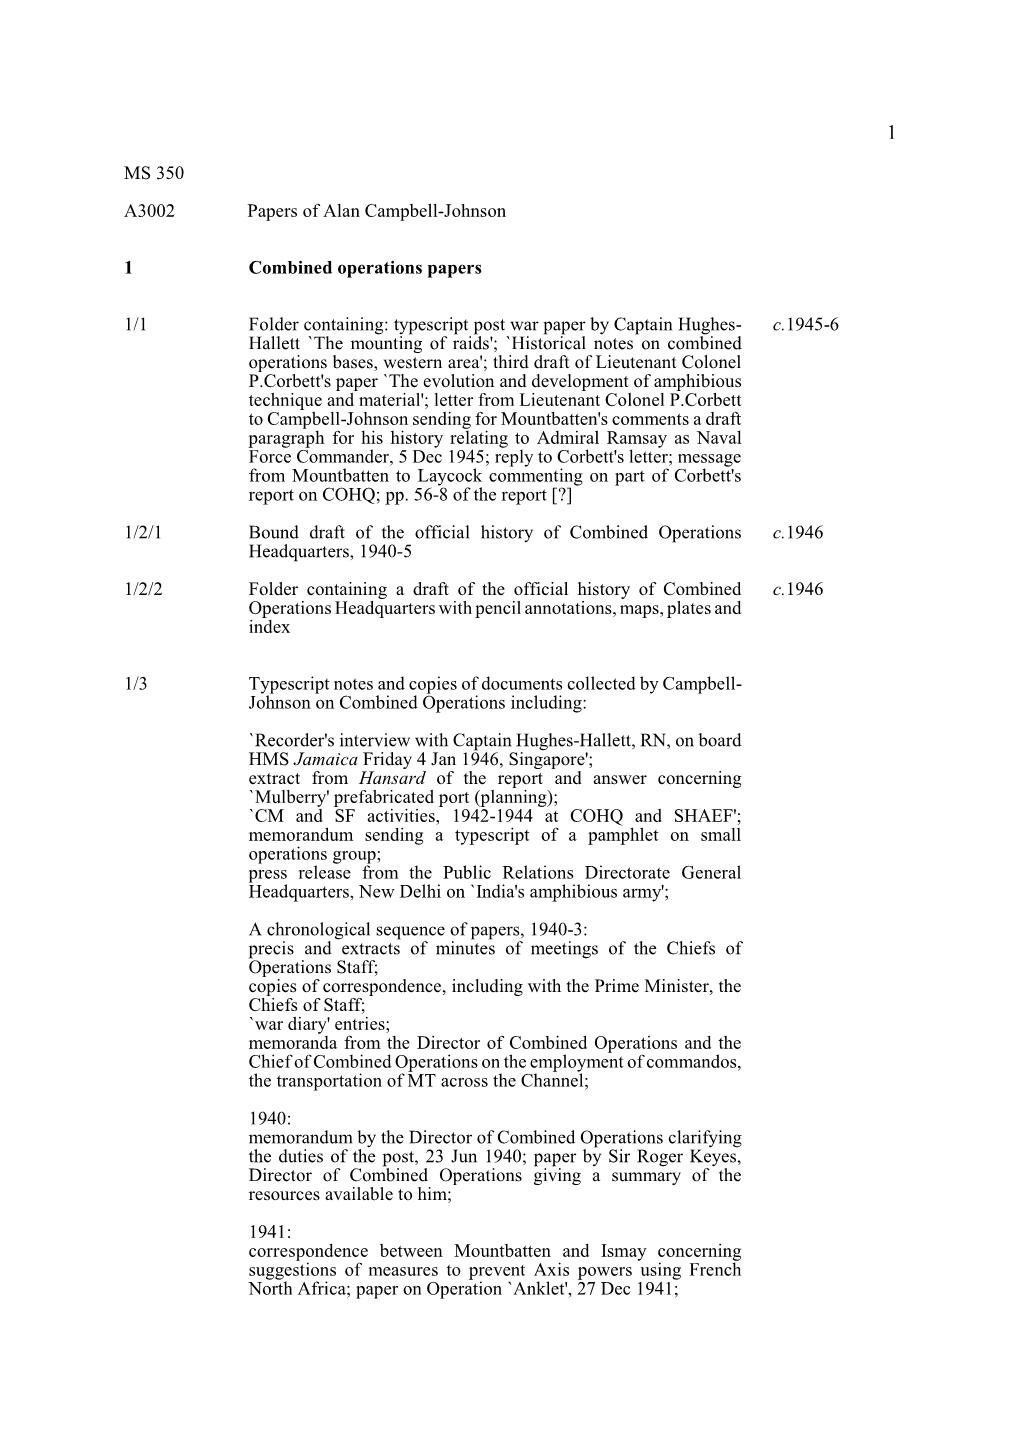 MS 350 A3002 Papers of Alan Campbell-Johnson 1 Combined Operations Papers 1/1 Folder Containing